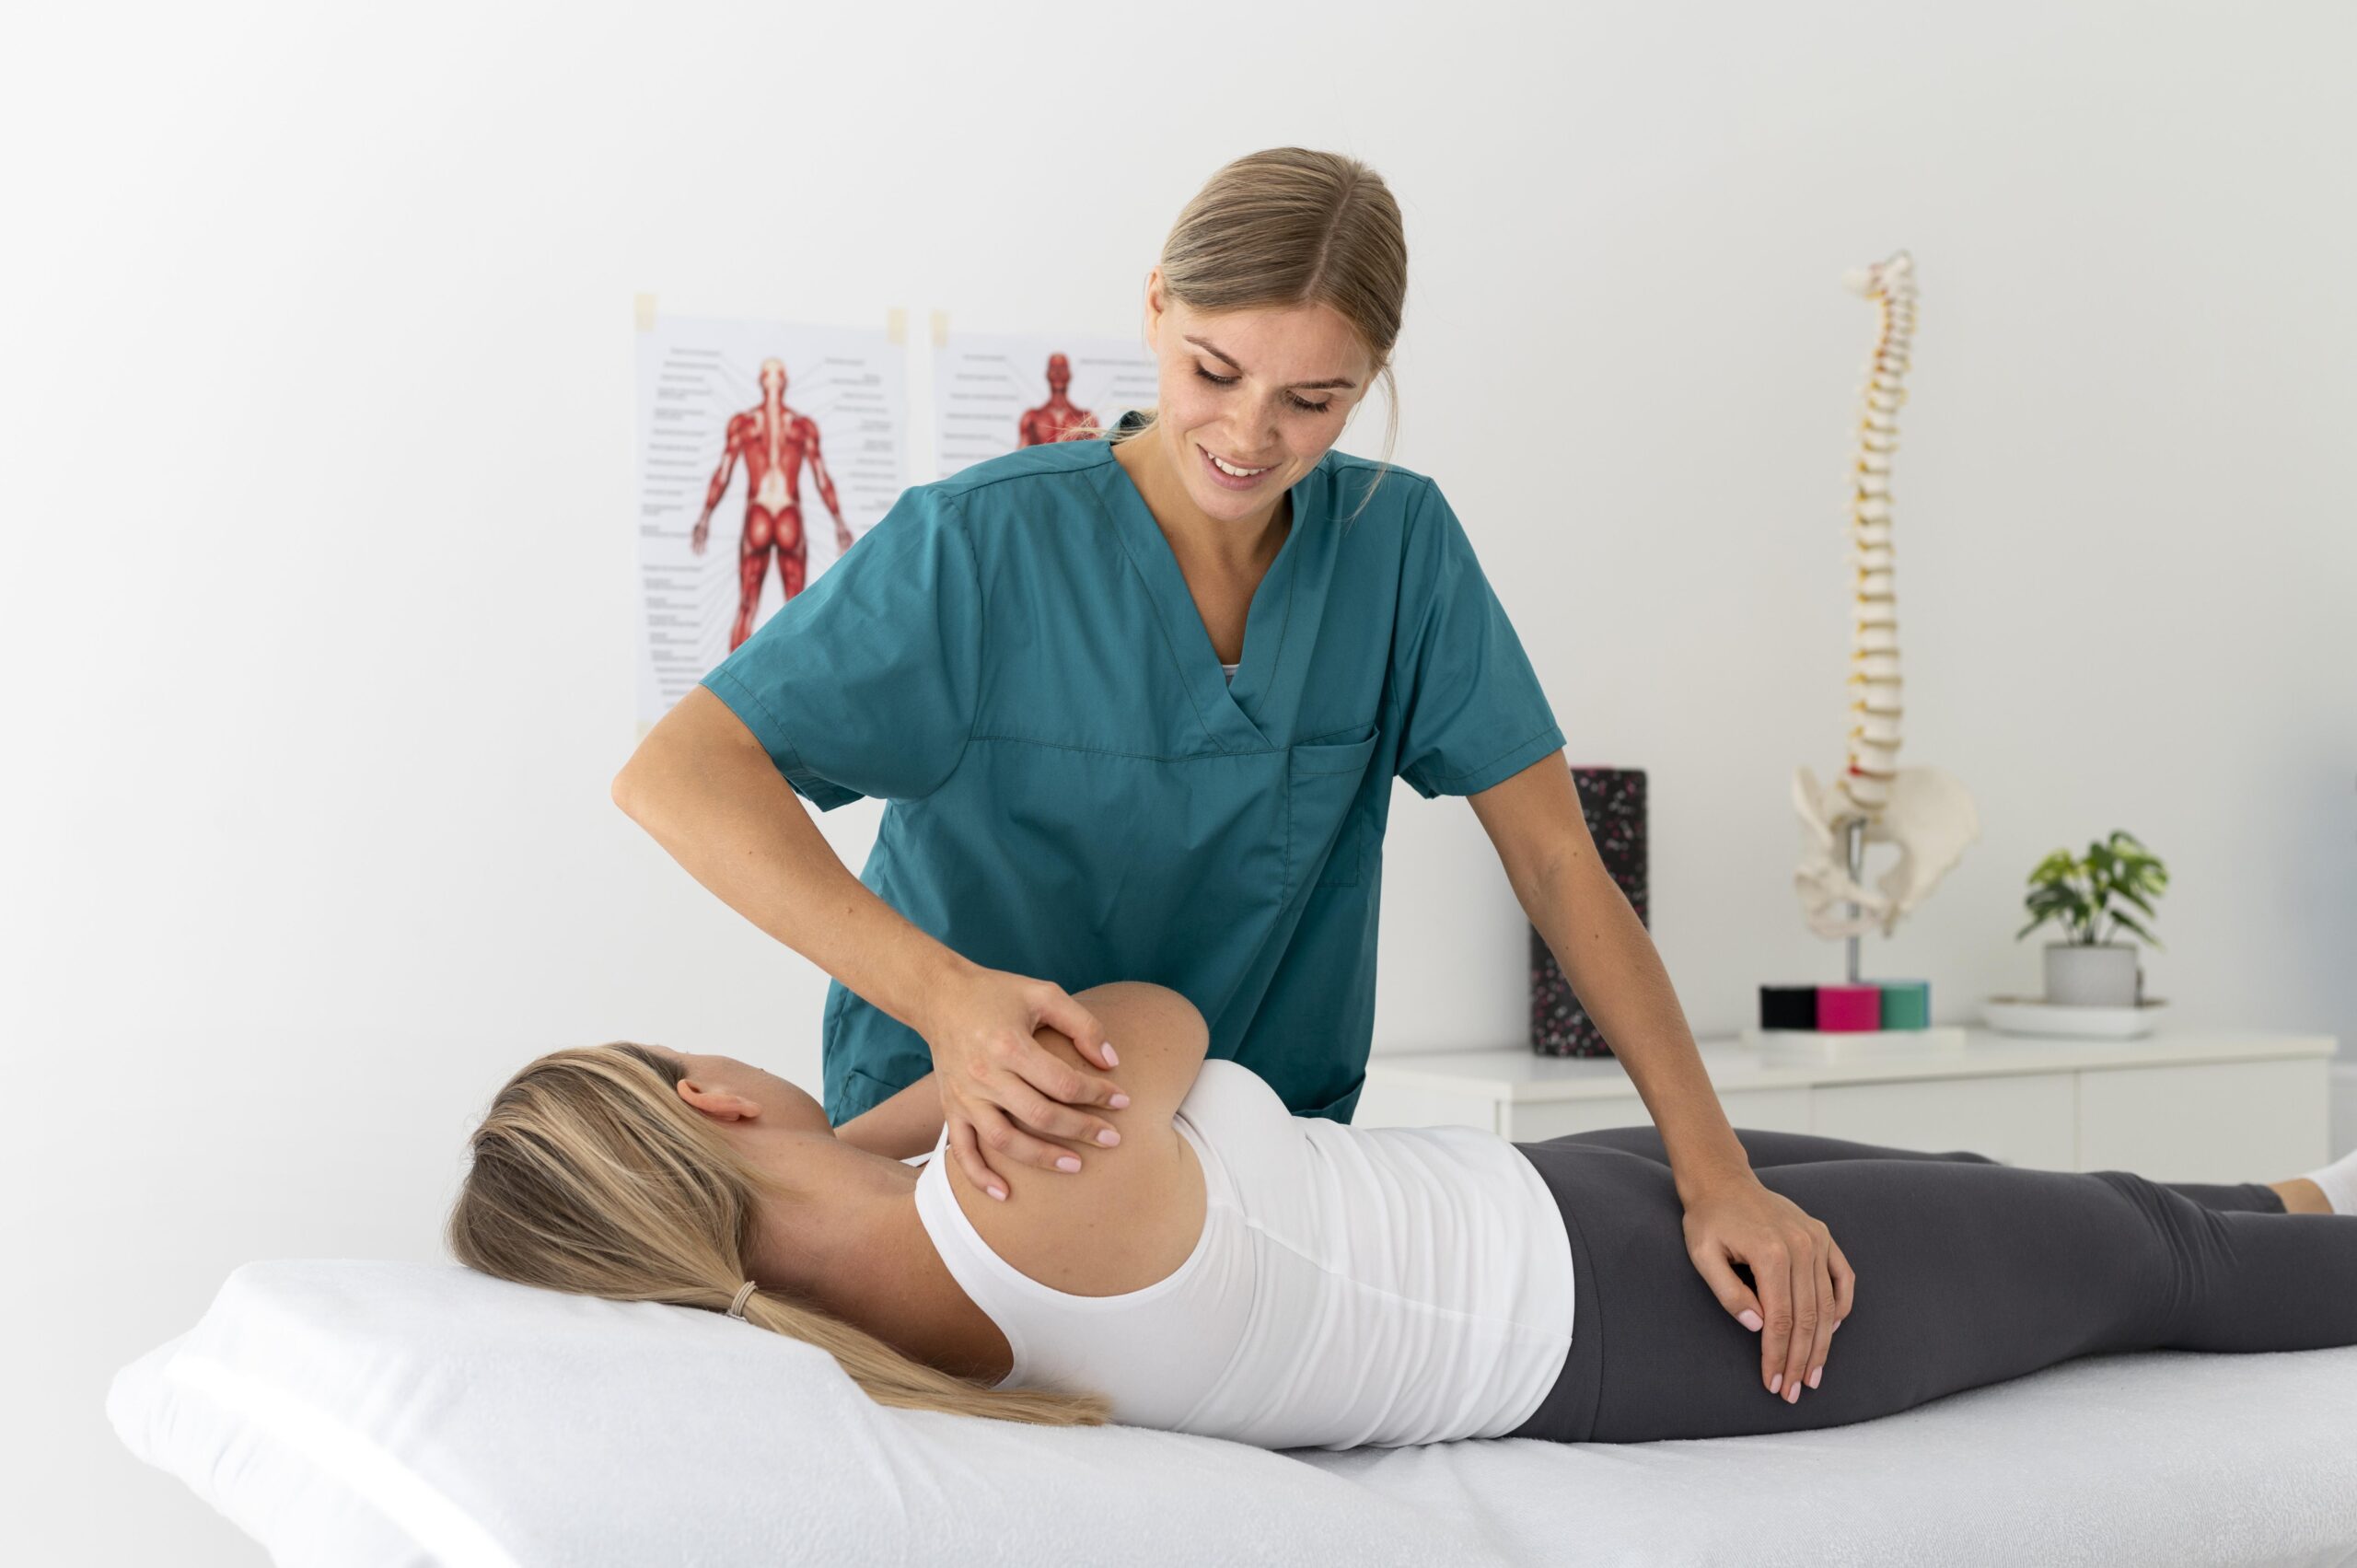 Wondering if Chiropractic Care is Safe or Not? Read this Blog!